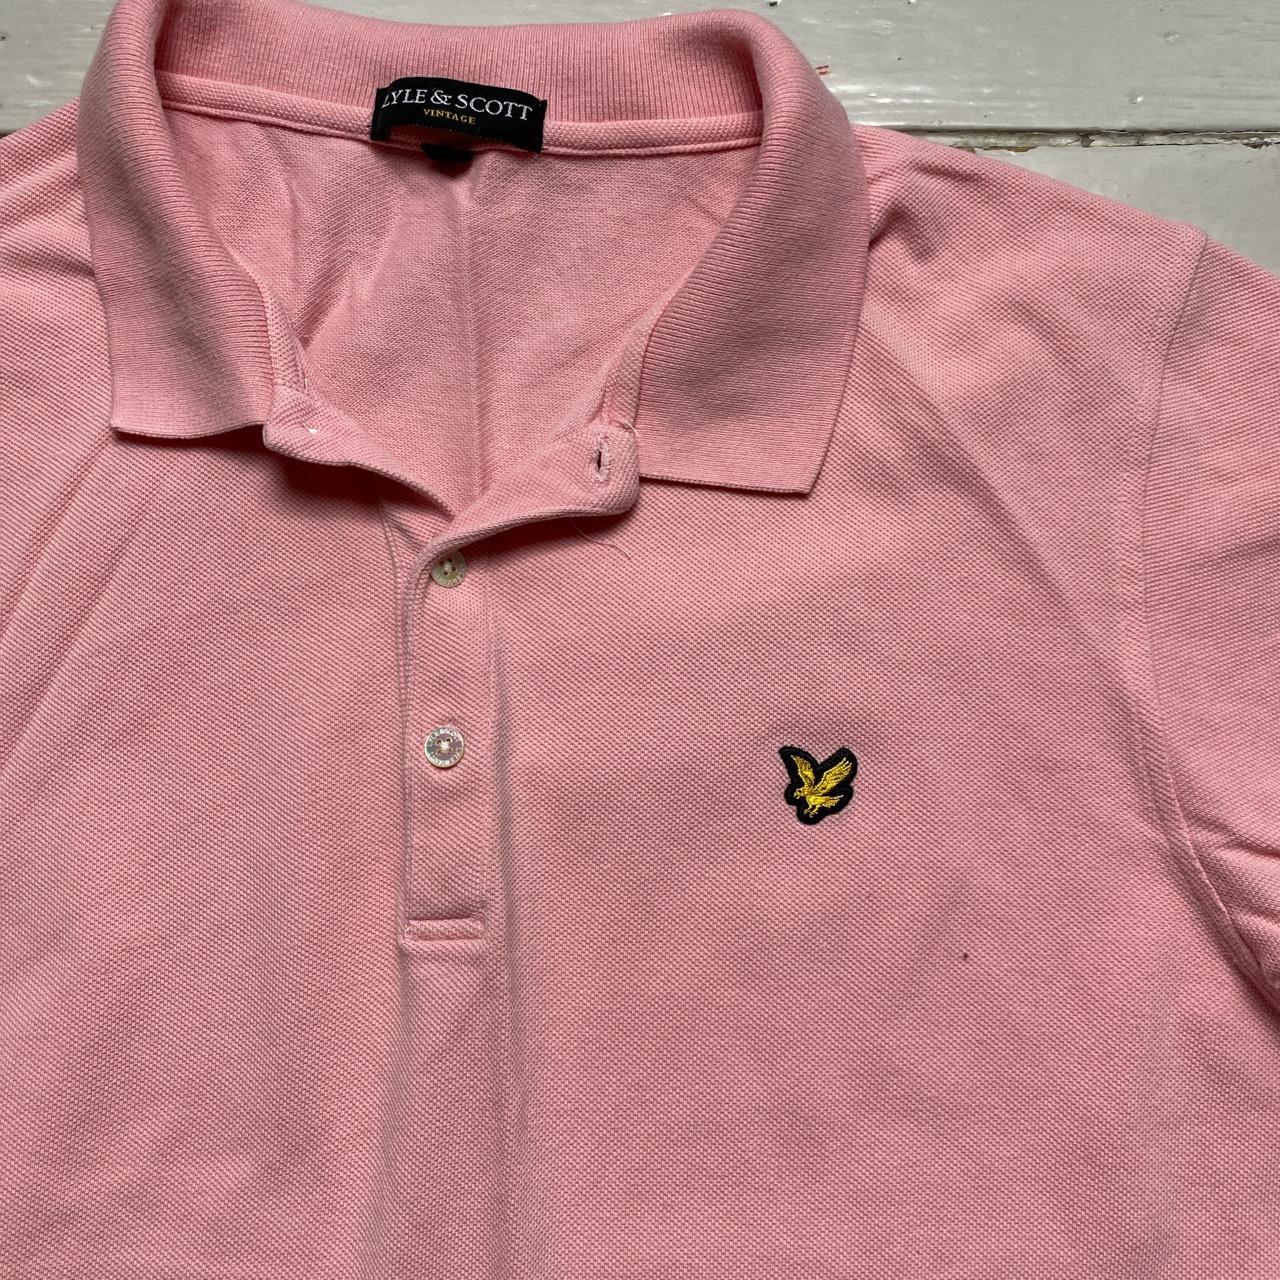 Lyle and Scott Pink Polo Shirt